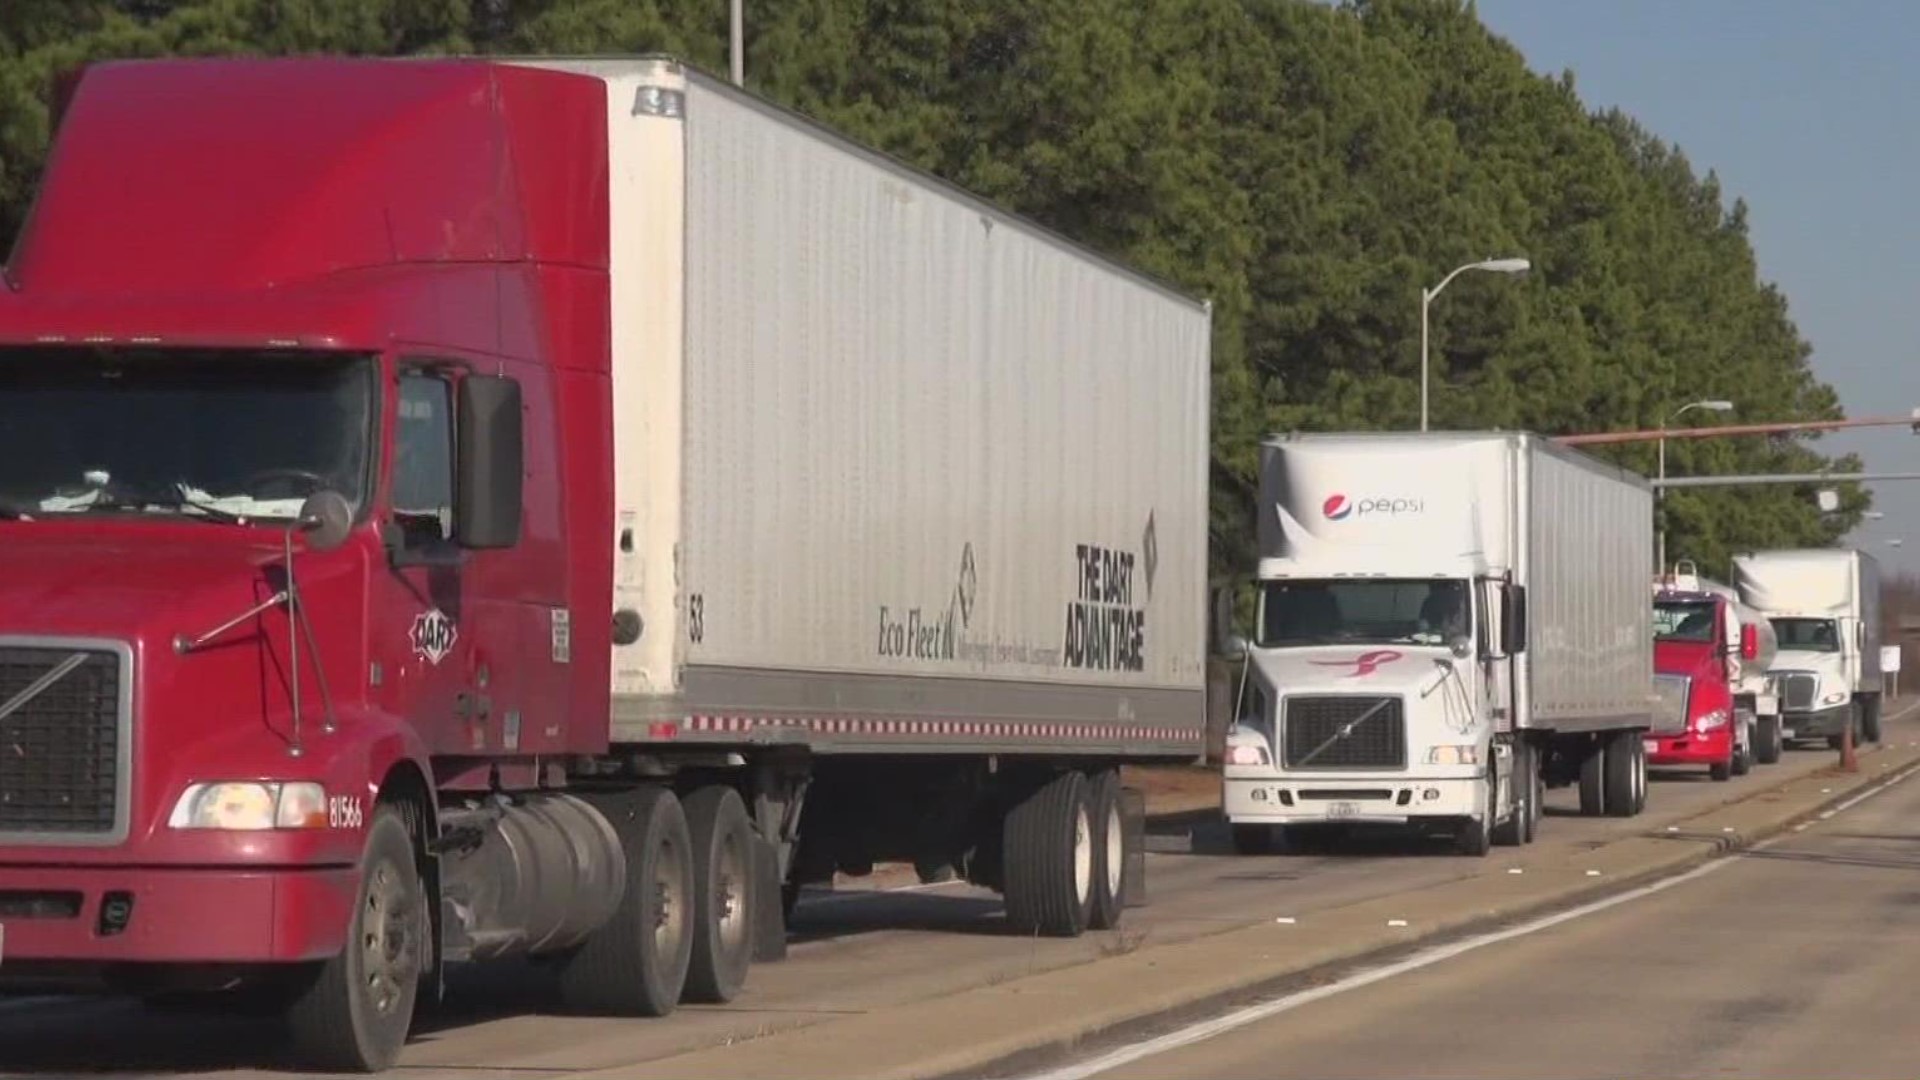 Trucking industry officials estimate the need for 80,000 truck drivers nationwide to meet shipping demands causing efforts to expedite driver licensing in Arkansas.